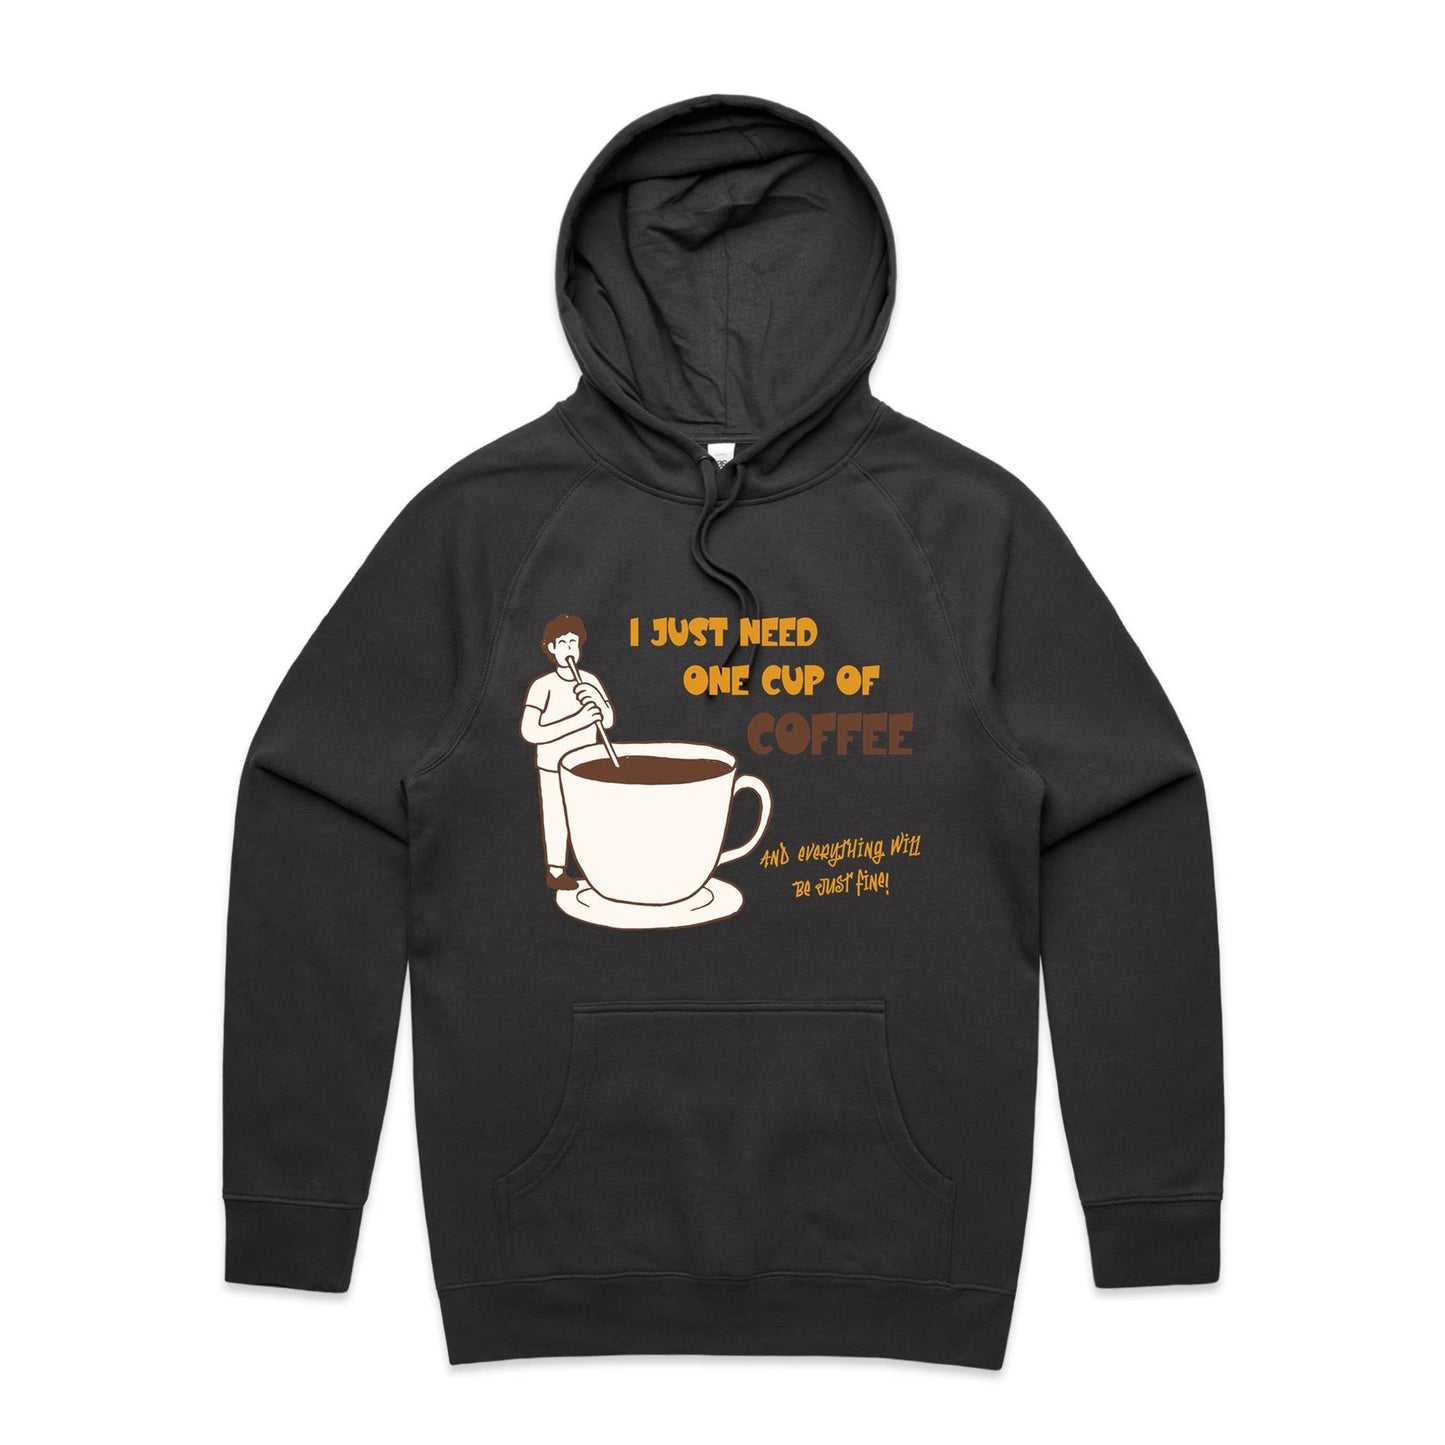 I Just Need One Cup Of Coffee And Everything Will Be Just Fine - Supply Hood Coal Mens Supply Hoodie Coffee